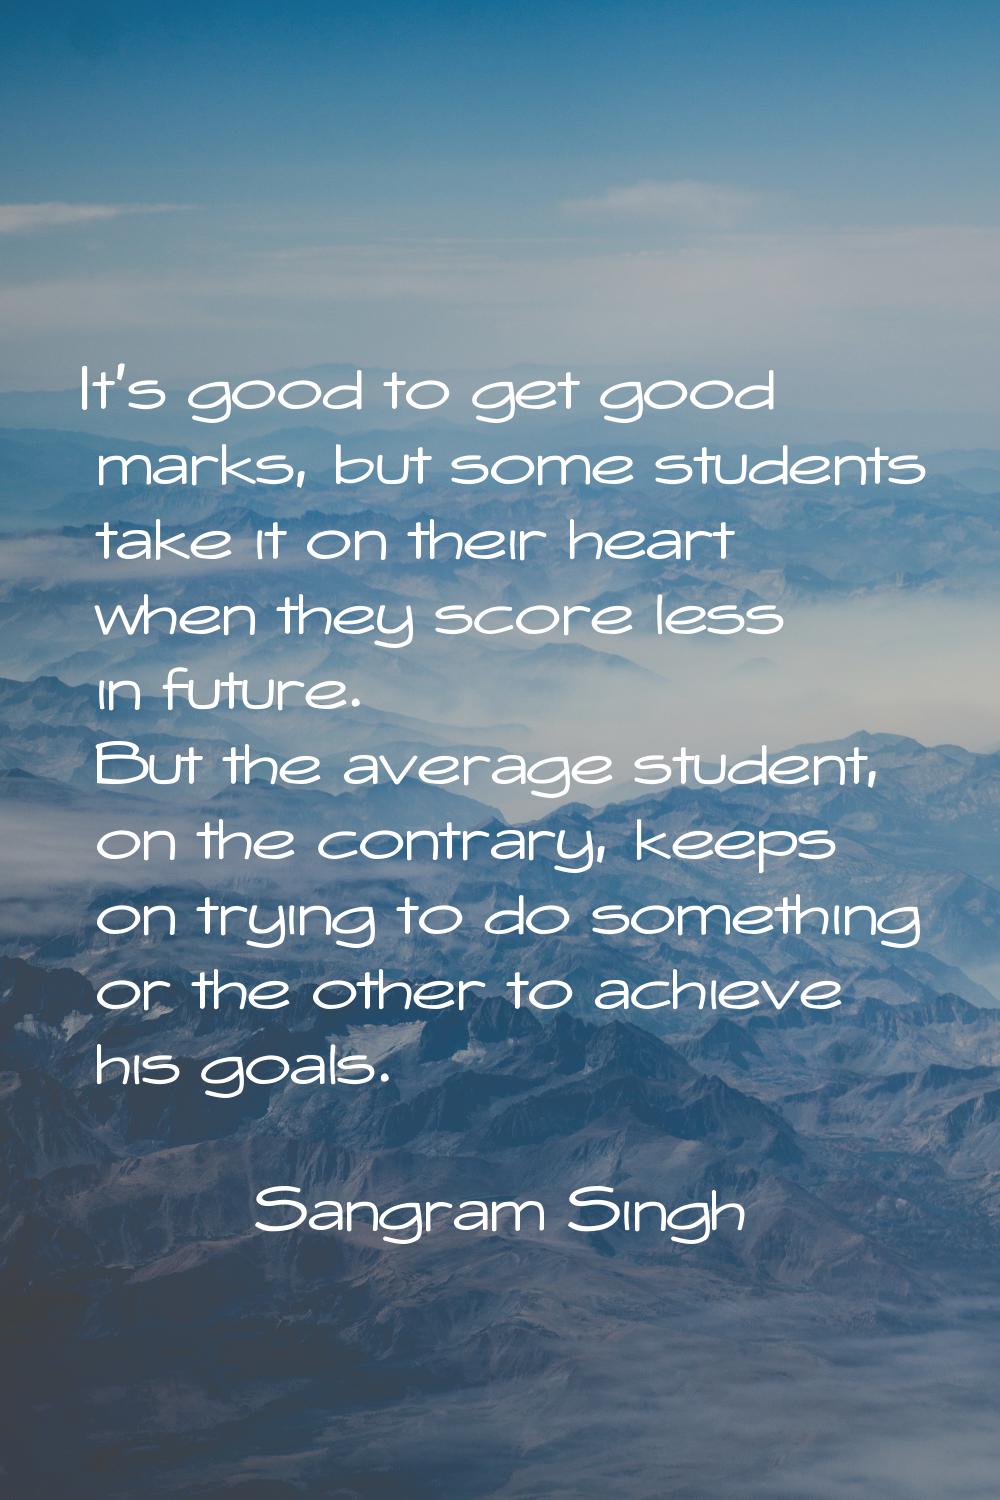 It's good to get good marks, but some students take it on their heart when they score less in futur